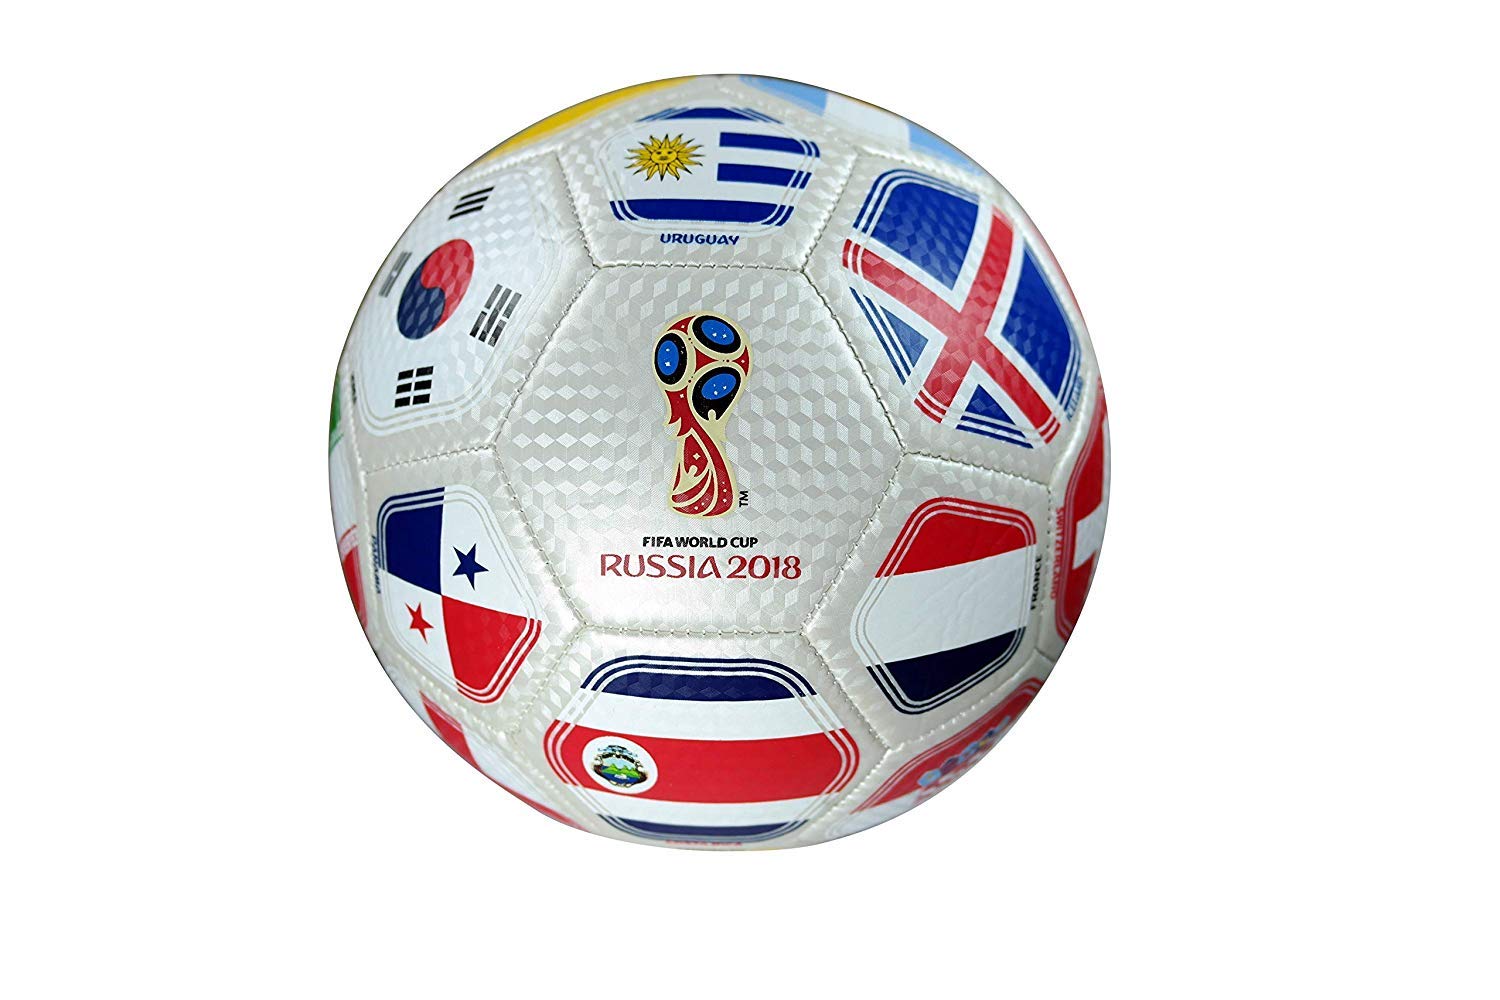 FIFA Official Russia 2018 World Cup Official Licensed Size 5 Ball 01-4 - image 1 of 3